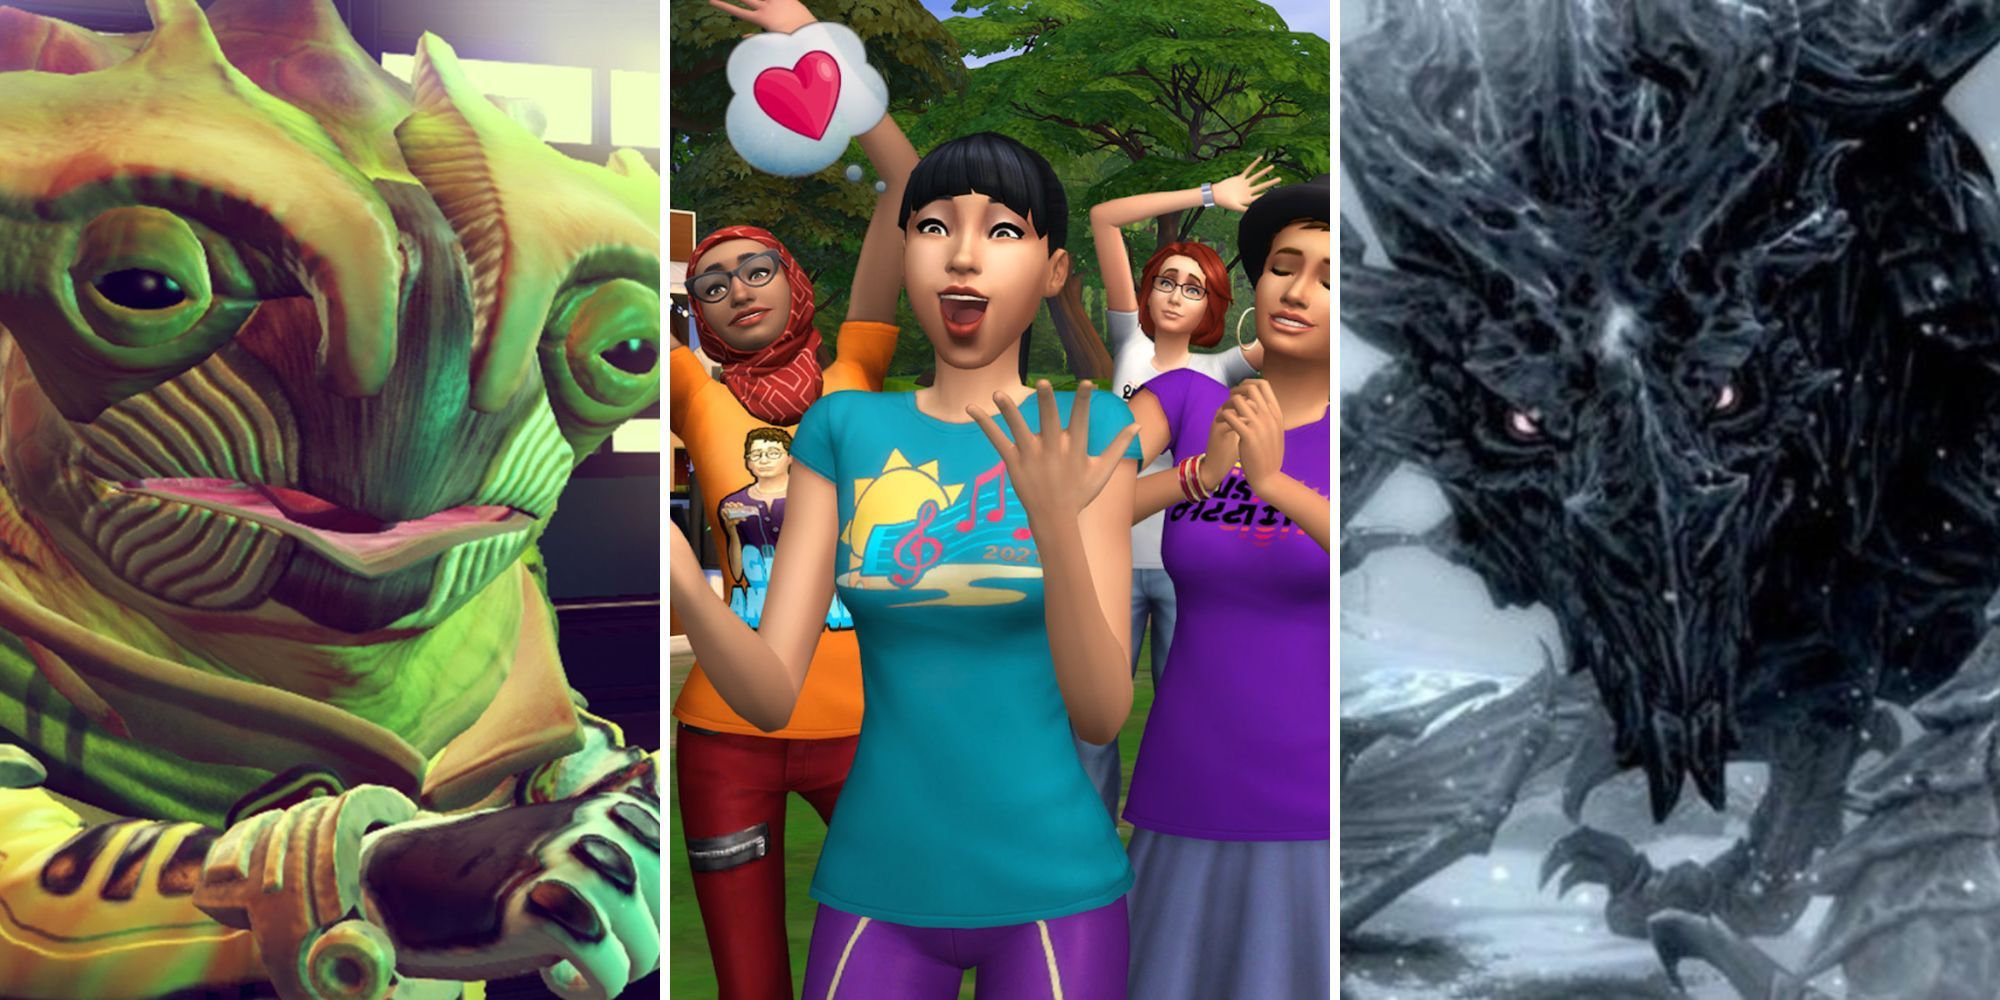 Photos of An alien from No Man's Sky, a group of sims from The Sims 4 and Alduin from Skyrim